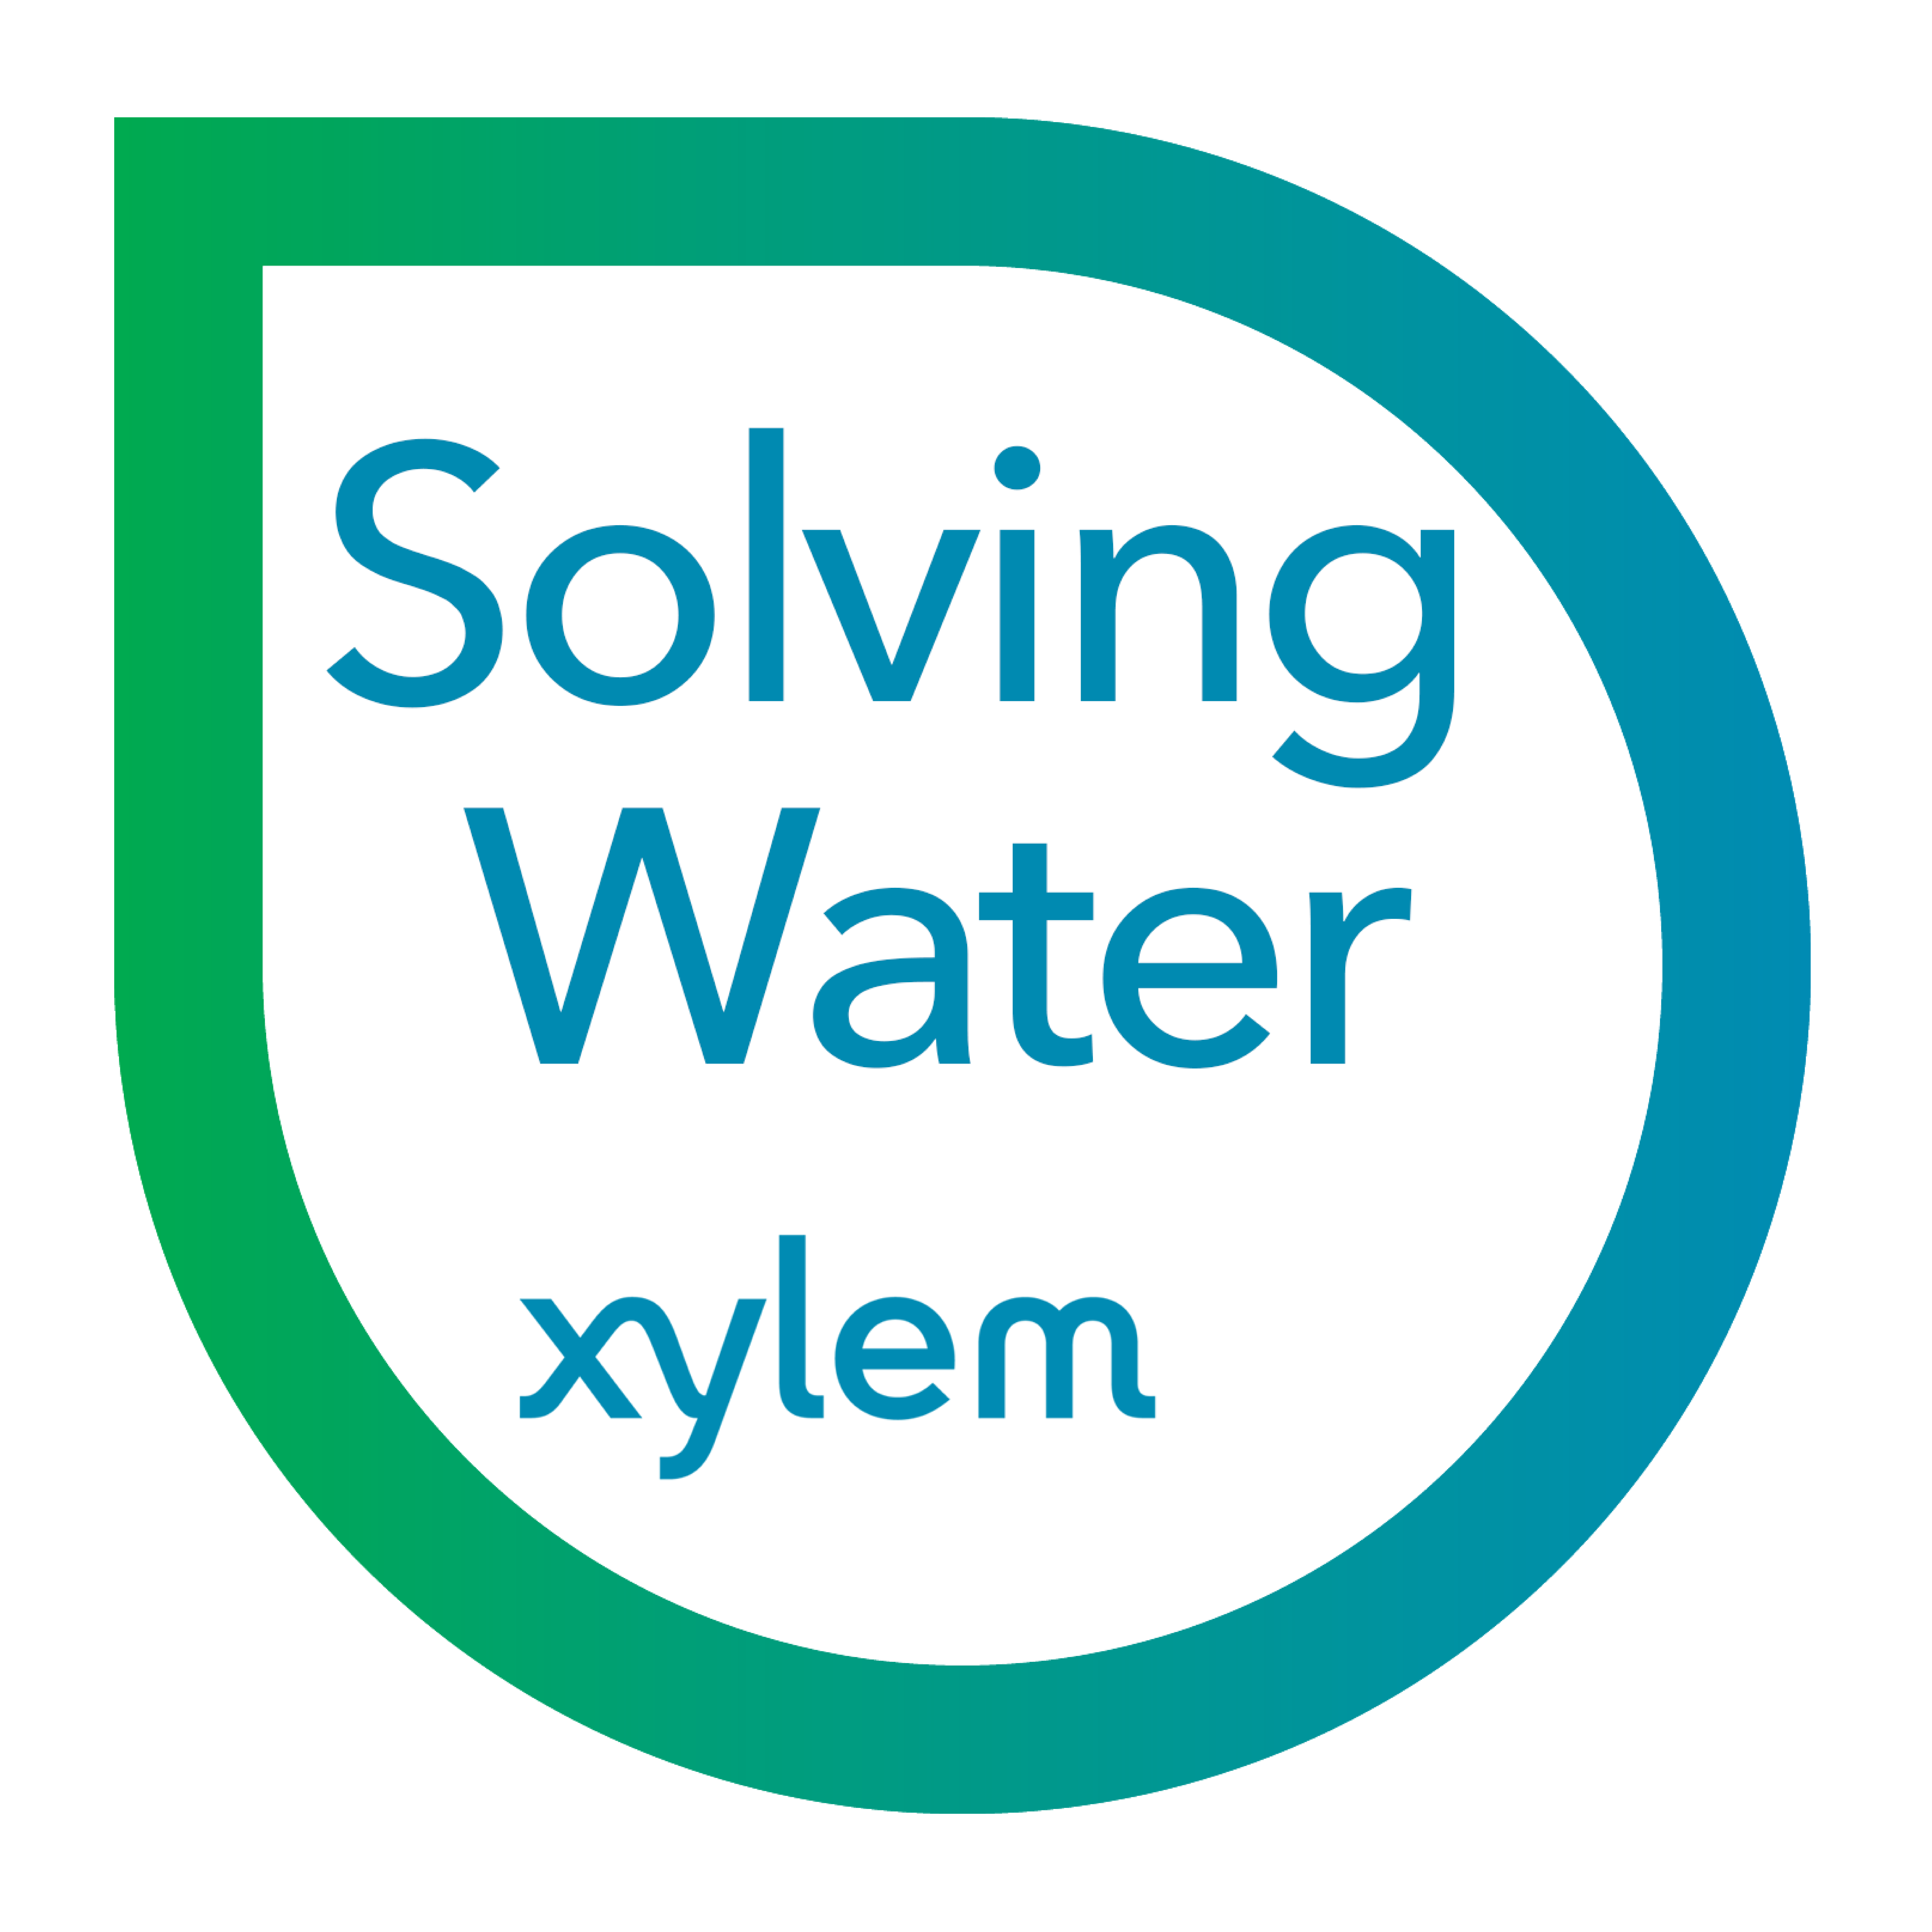 There are episodes on water reuse, treatment and transport, stressed water supply, monitoring and controls.